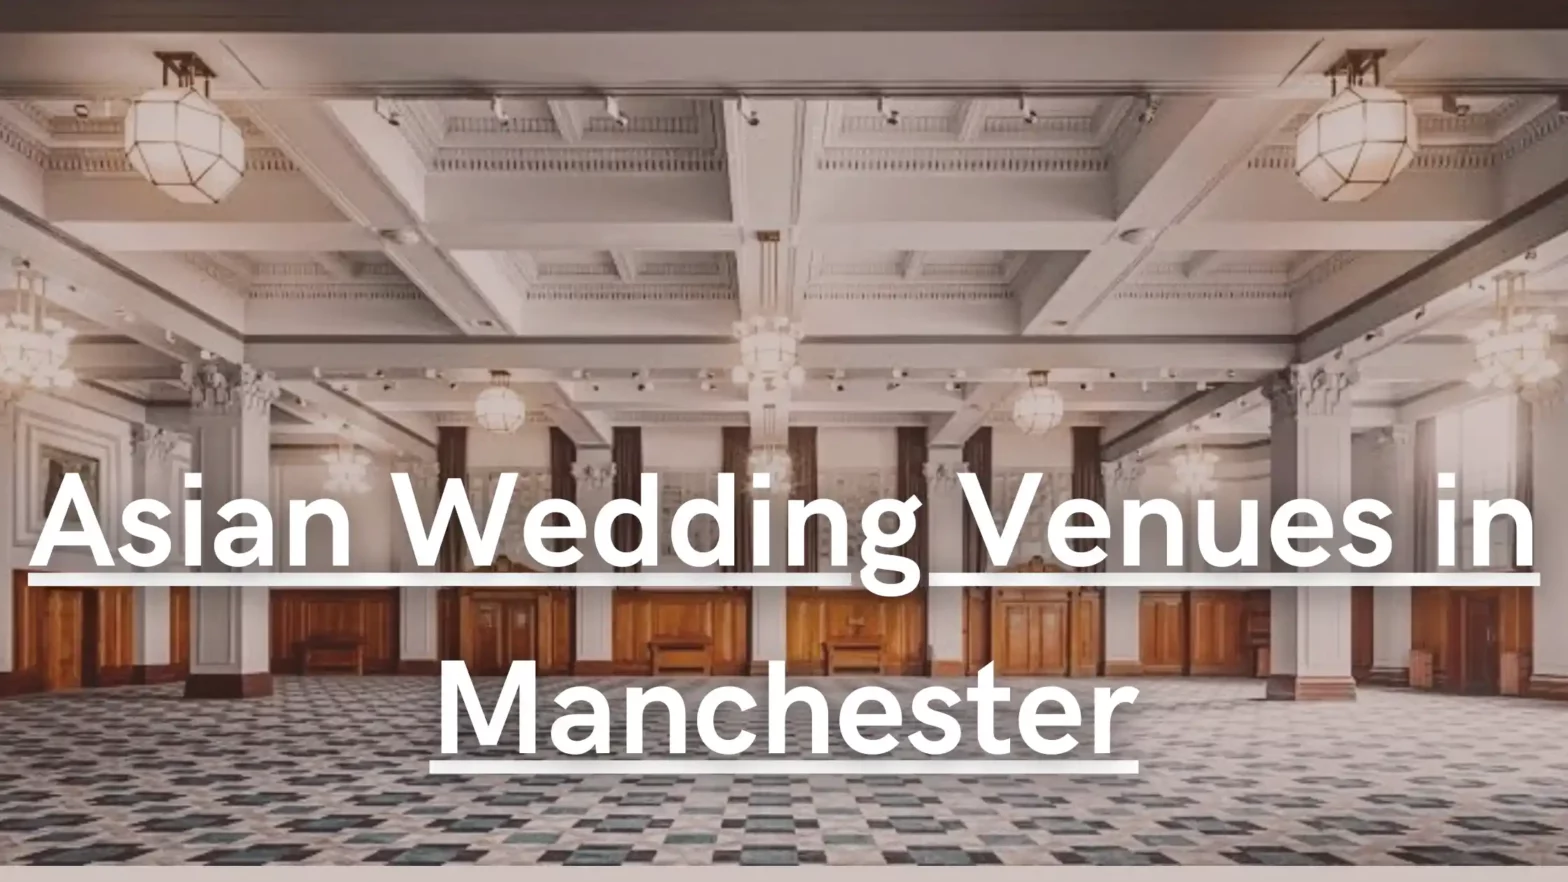 Asian Wedding Venues in Manchester